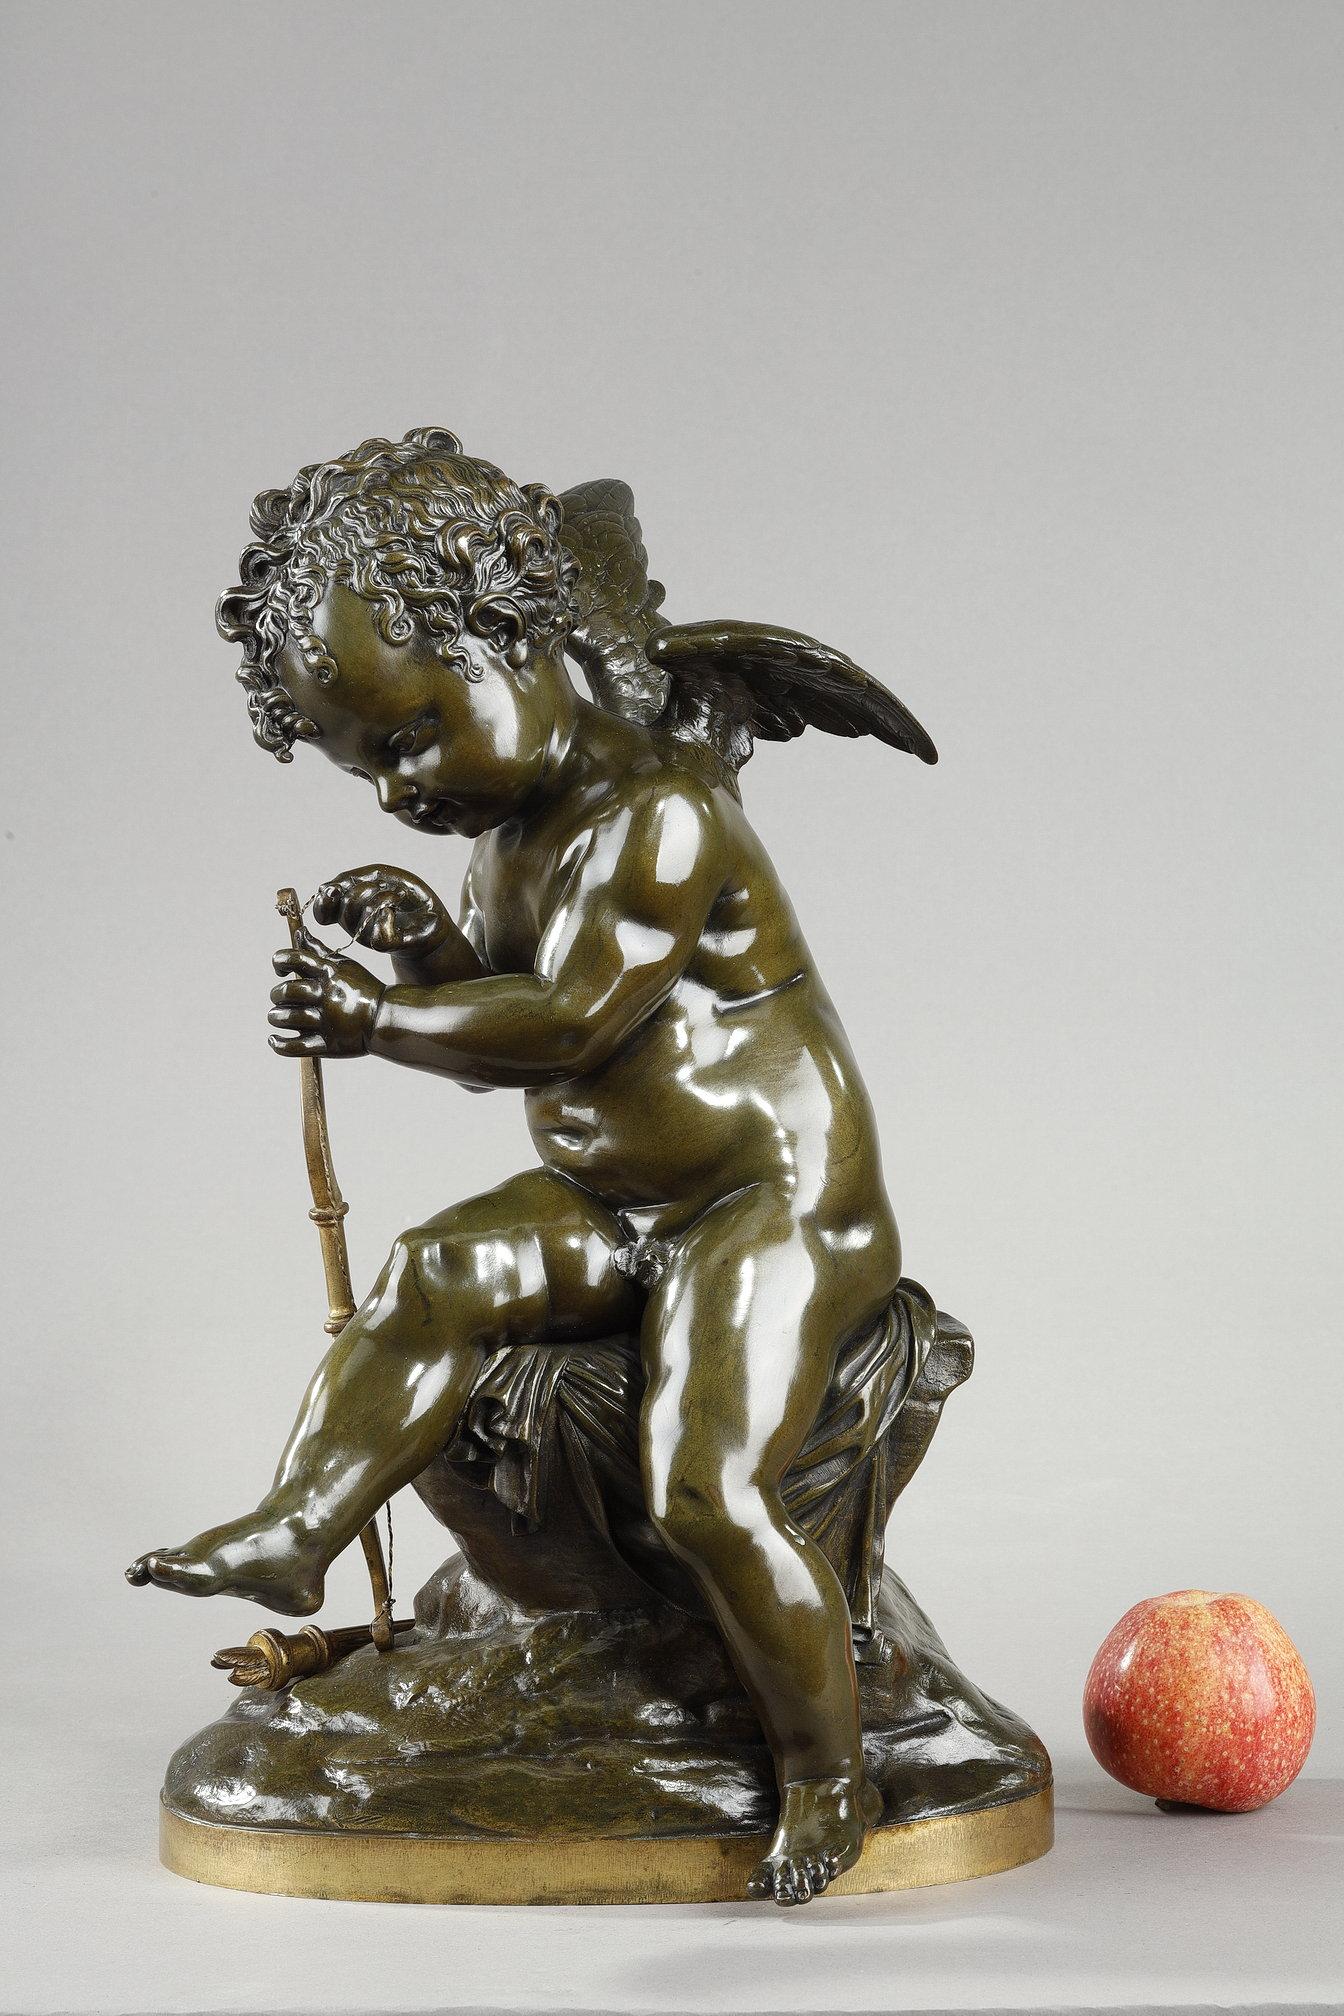 Green patina bronze proof of a cupid stringing his bow, after a marble original presented at the 1814 Salon by Charles Gabriel Sauvage dit Lemire (1741-1827). Love is shown seated and concentrating, fastening his bowstring with the quiver at his